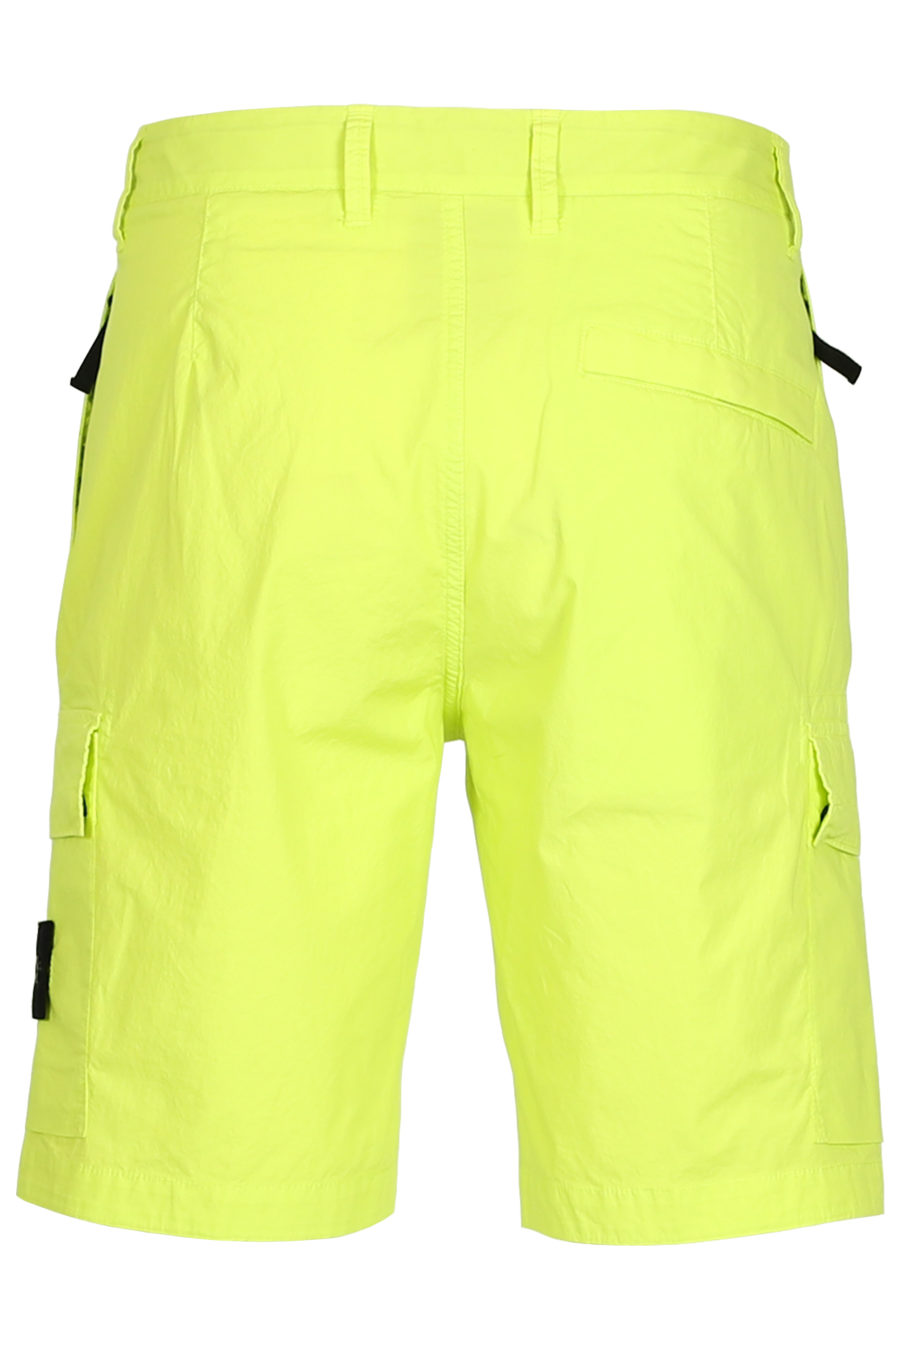 Lime green shorts - IMG 3765